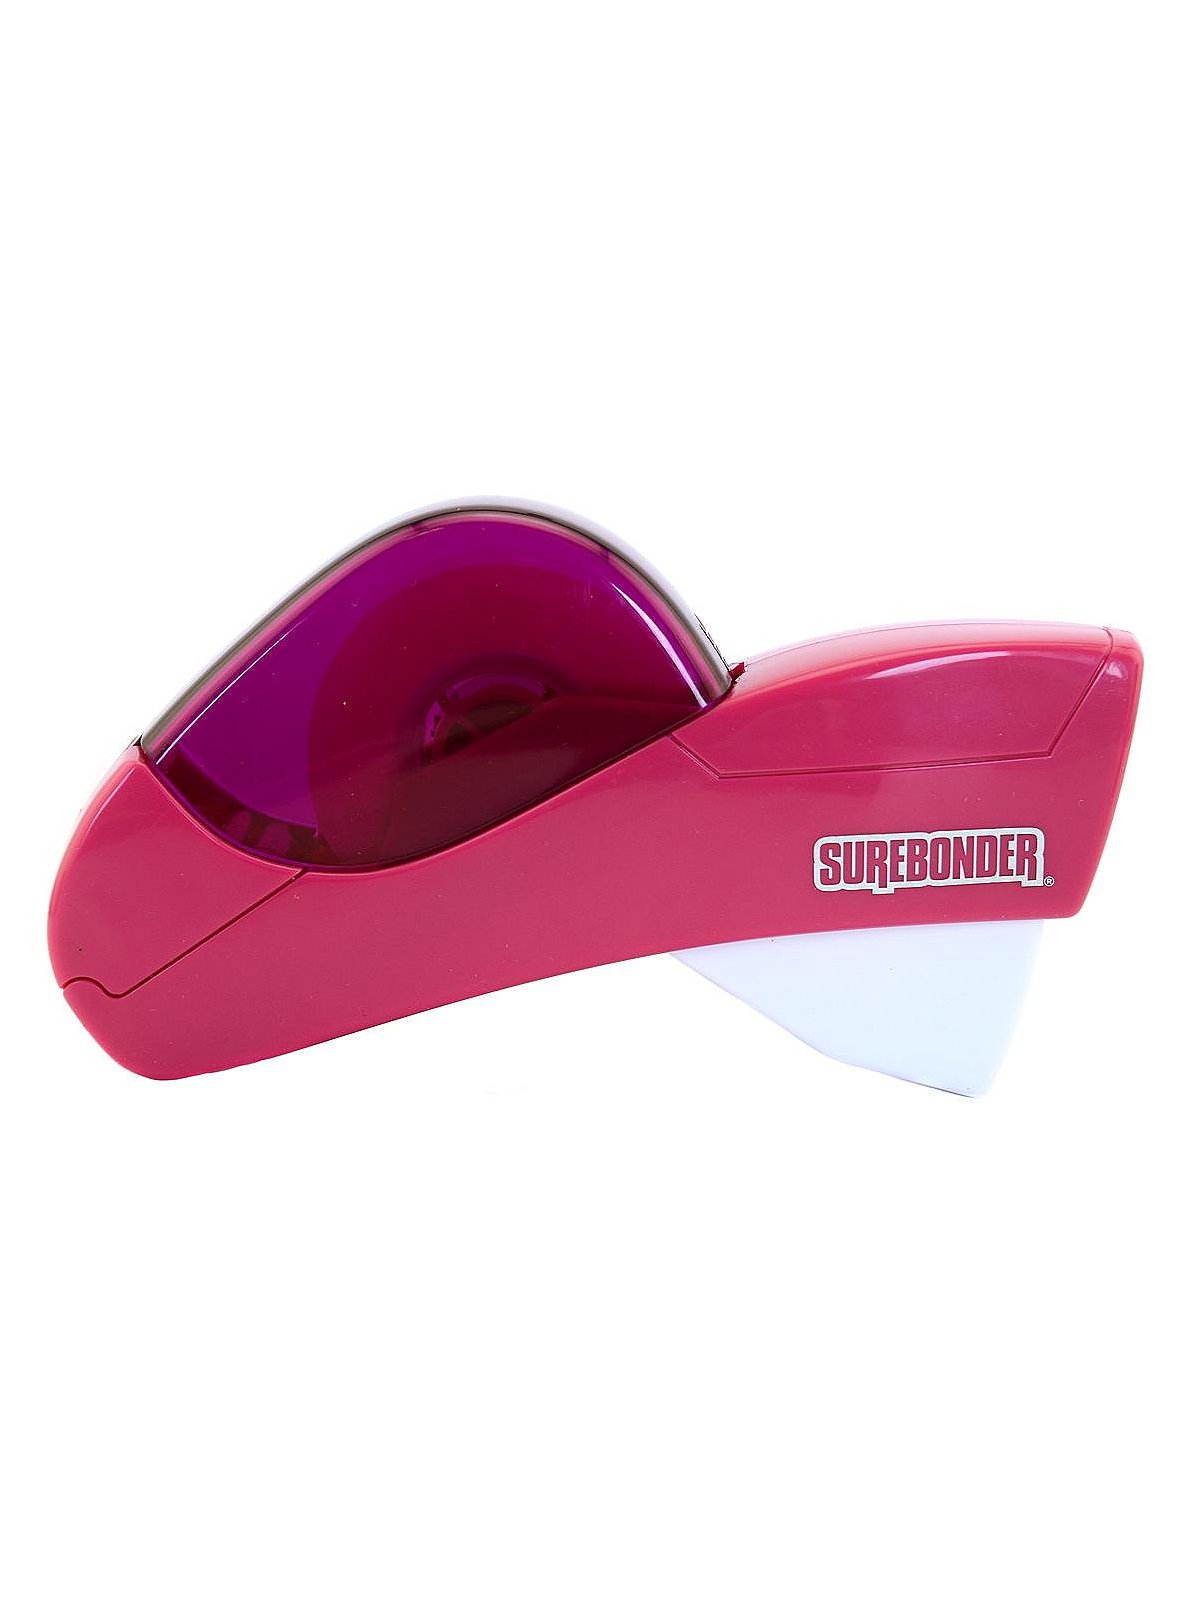 1pc Red Metal Tape Dispenser Quick Secure Online Checkout - Temu